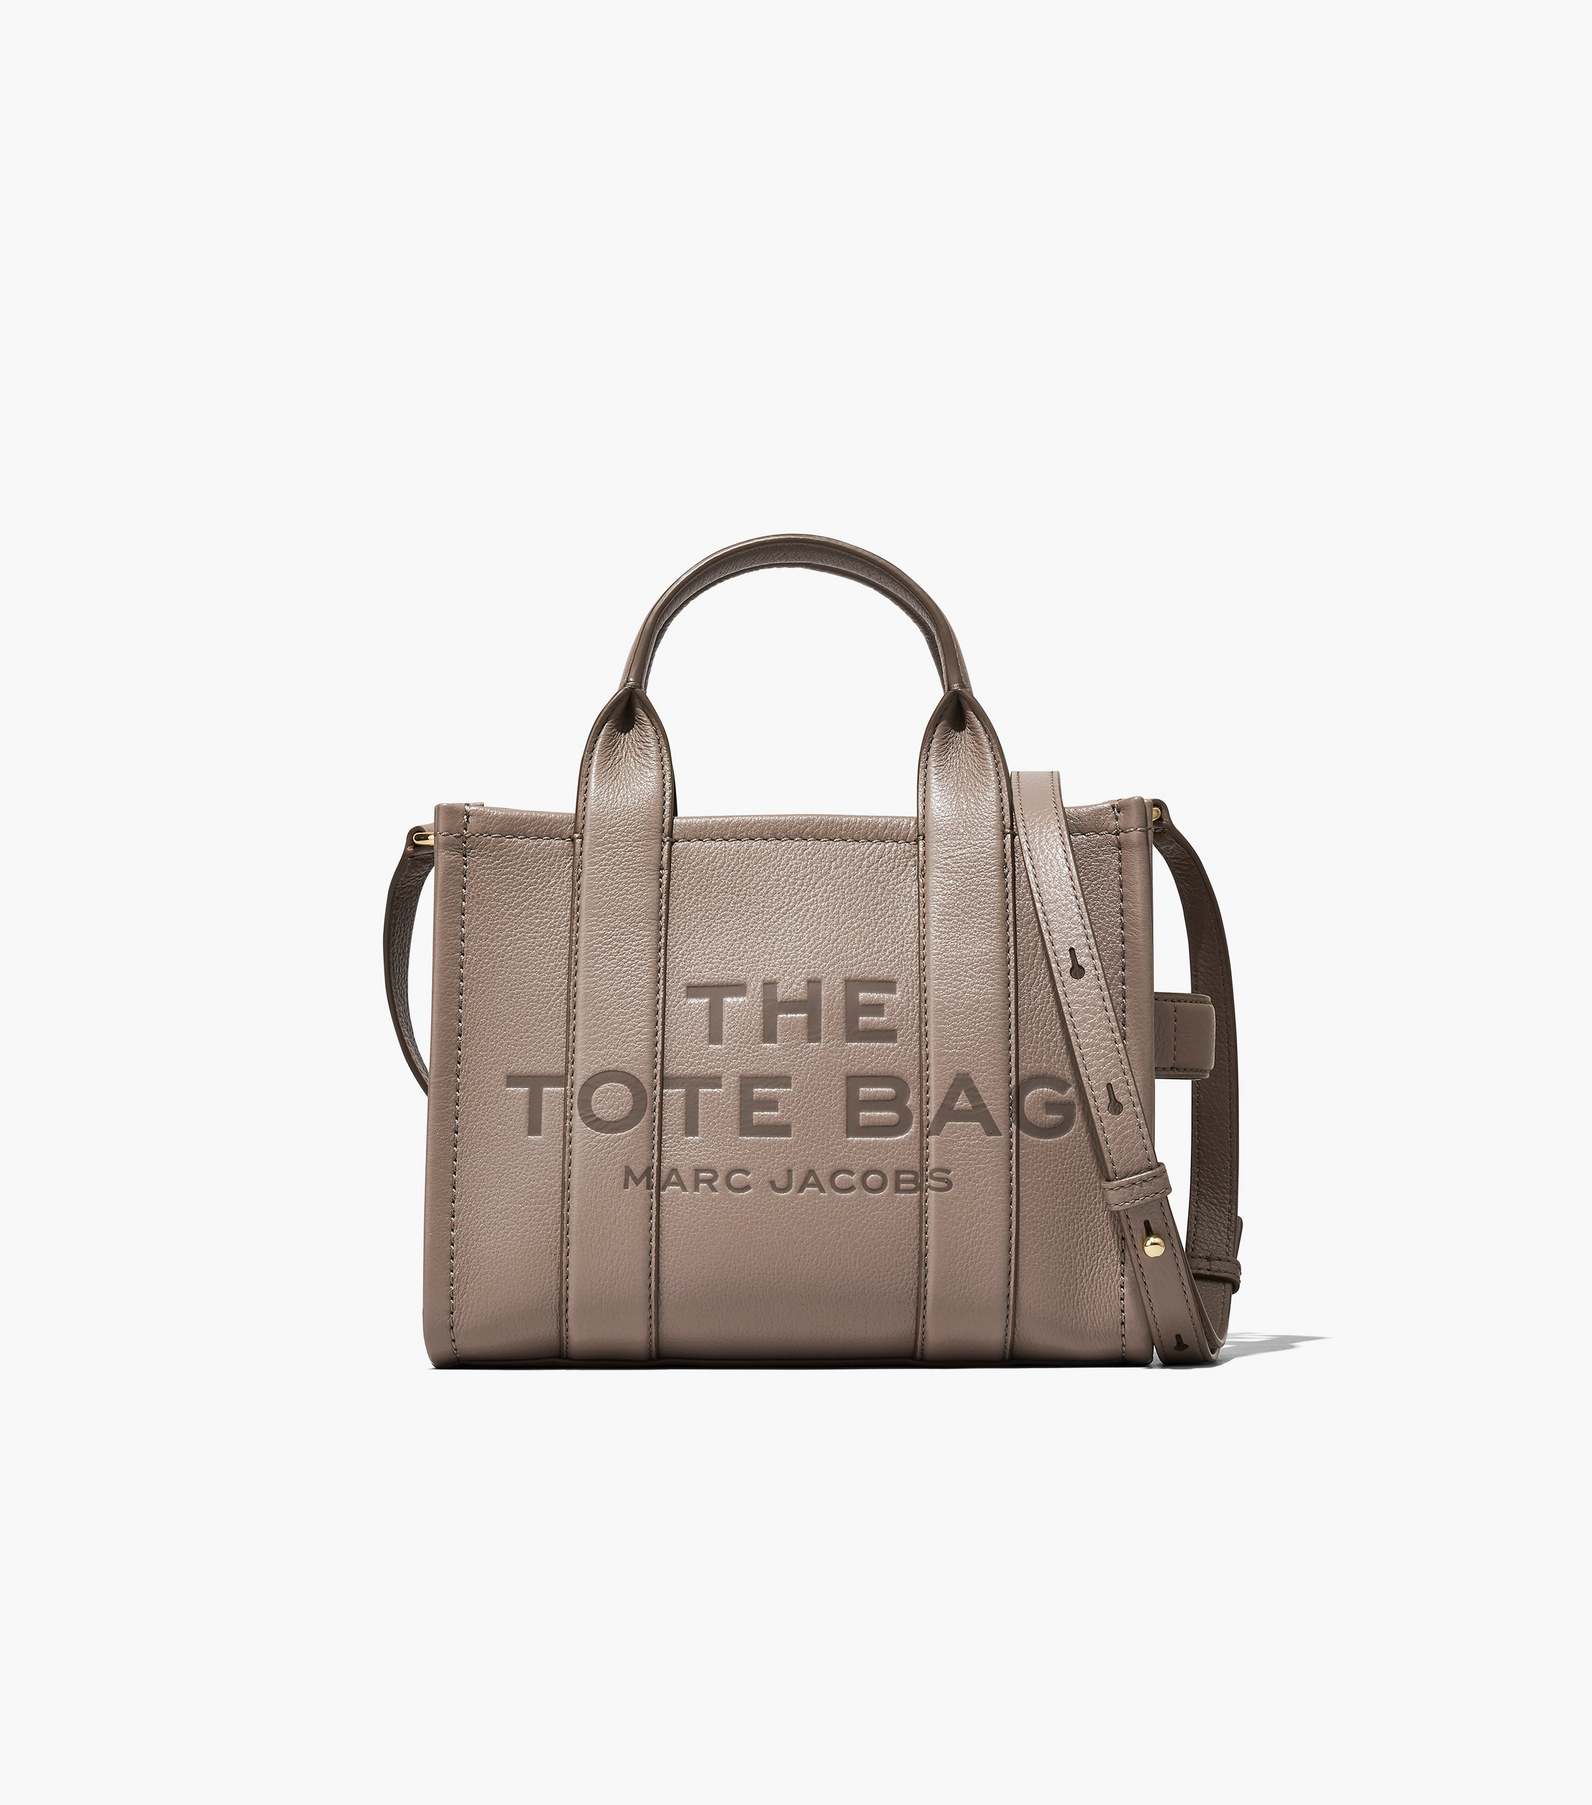 Help me pick - opinions on the Marc Jacobs “The Tote Bag” vs. a